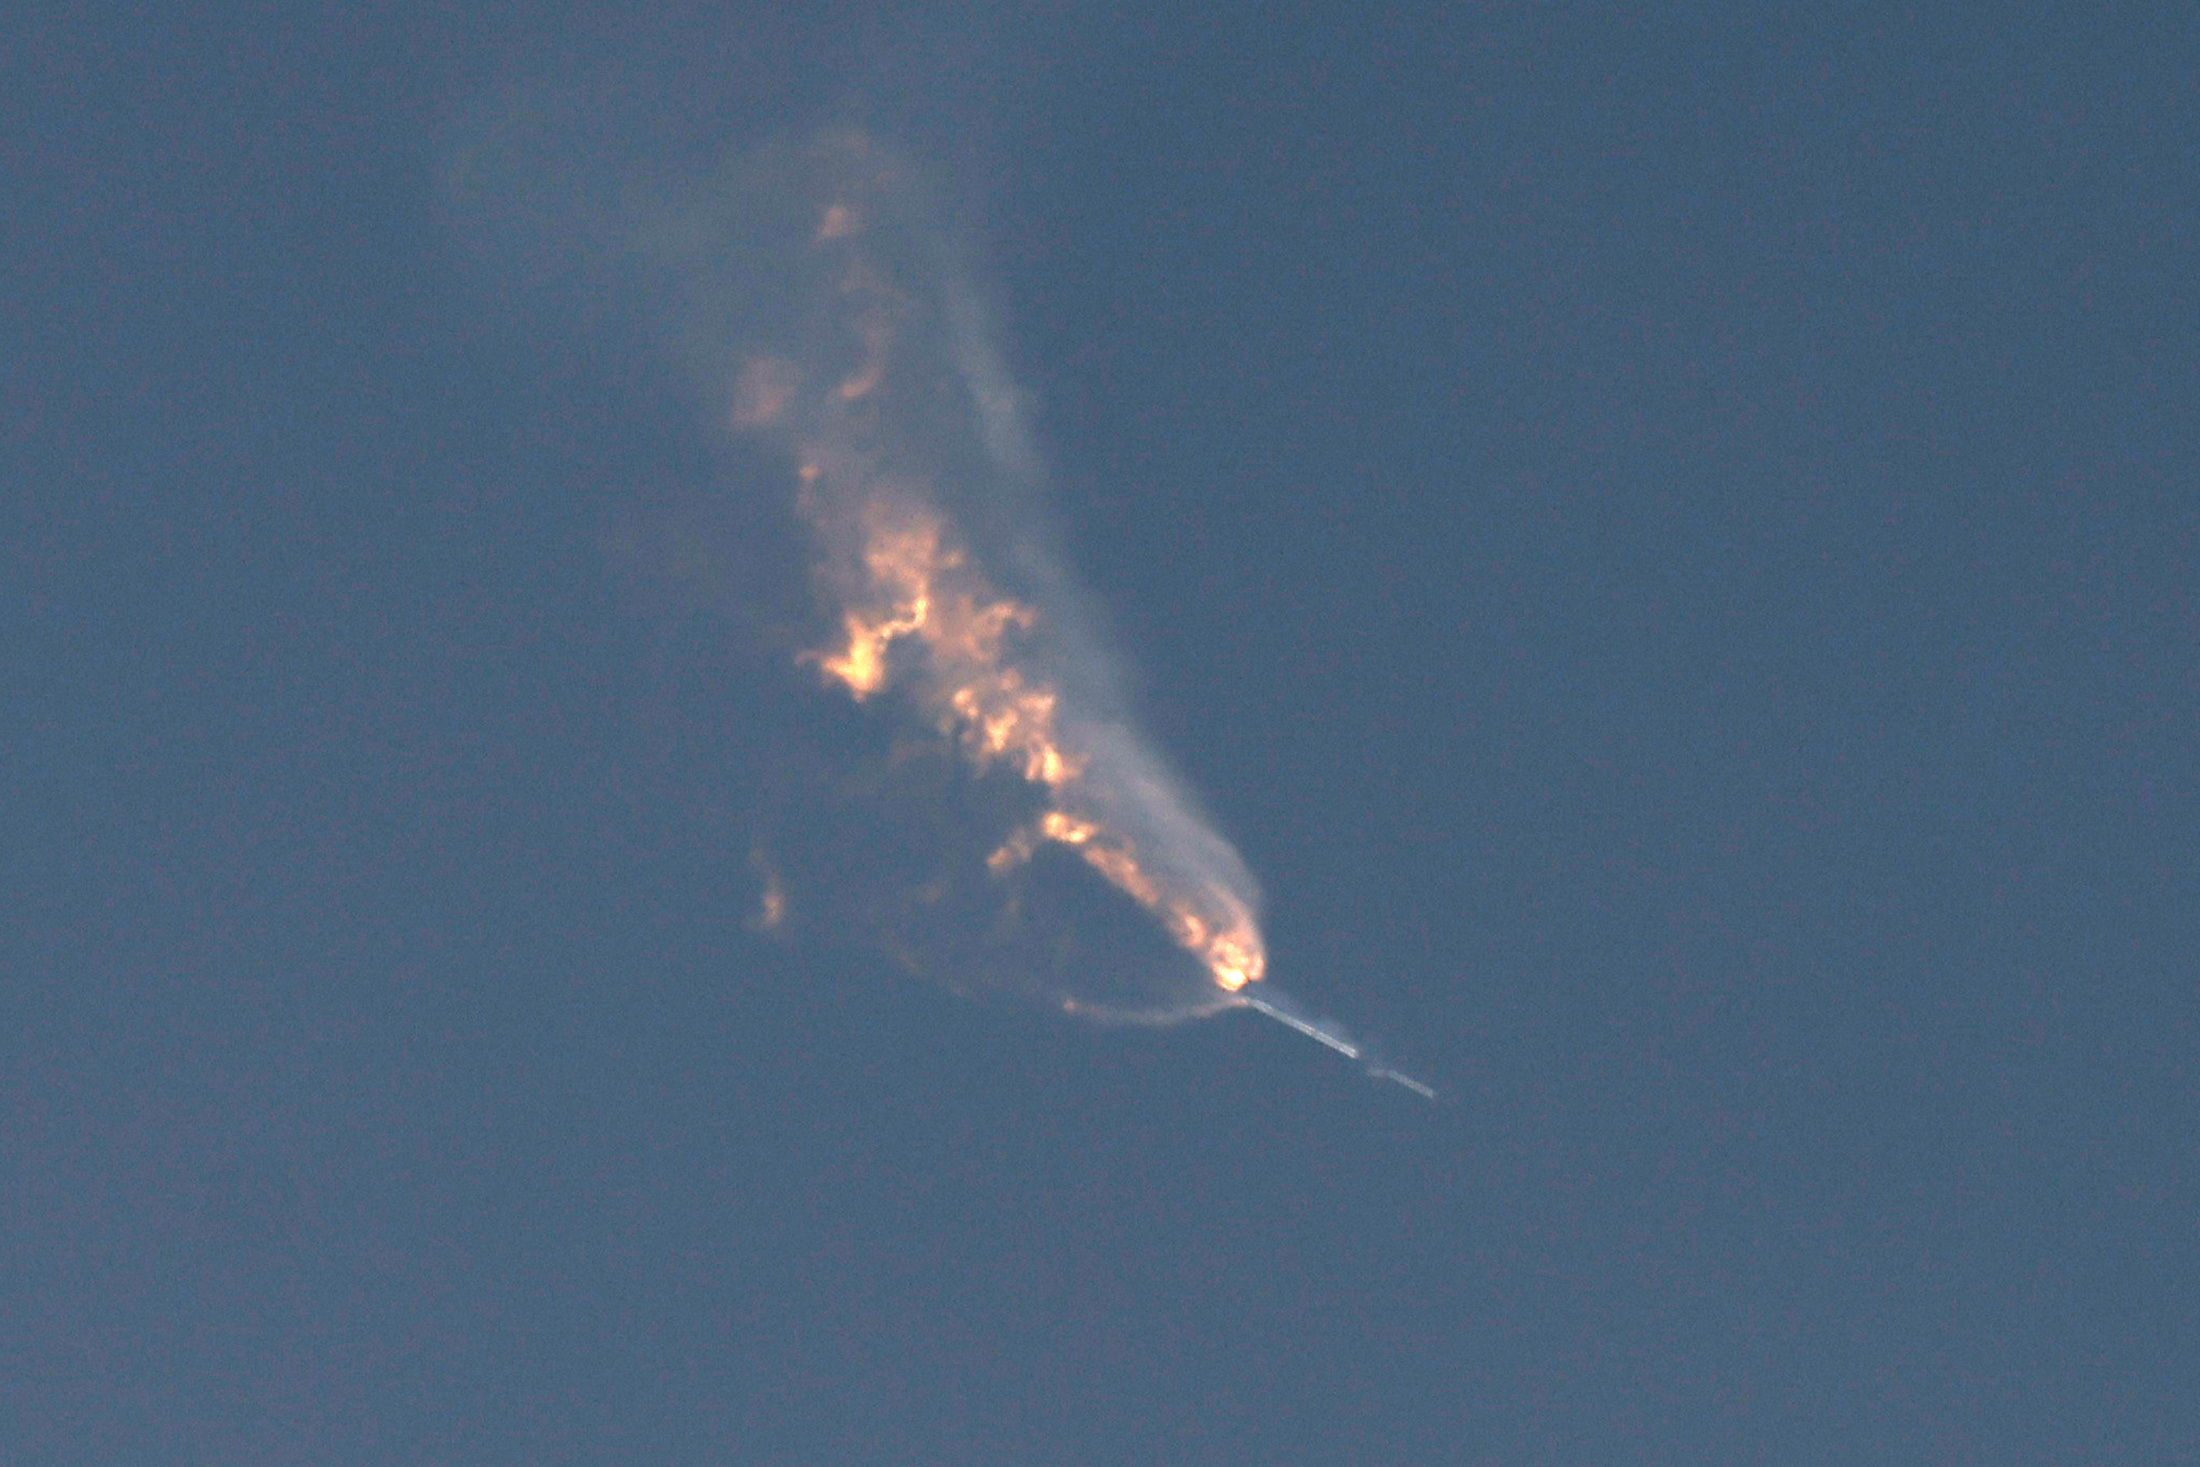 SpaceX Starship launches from Boca Chica near Brownsville